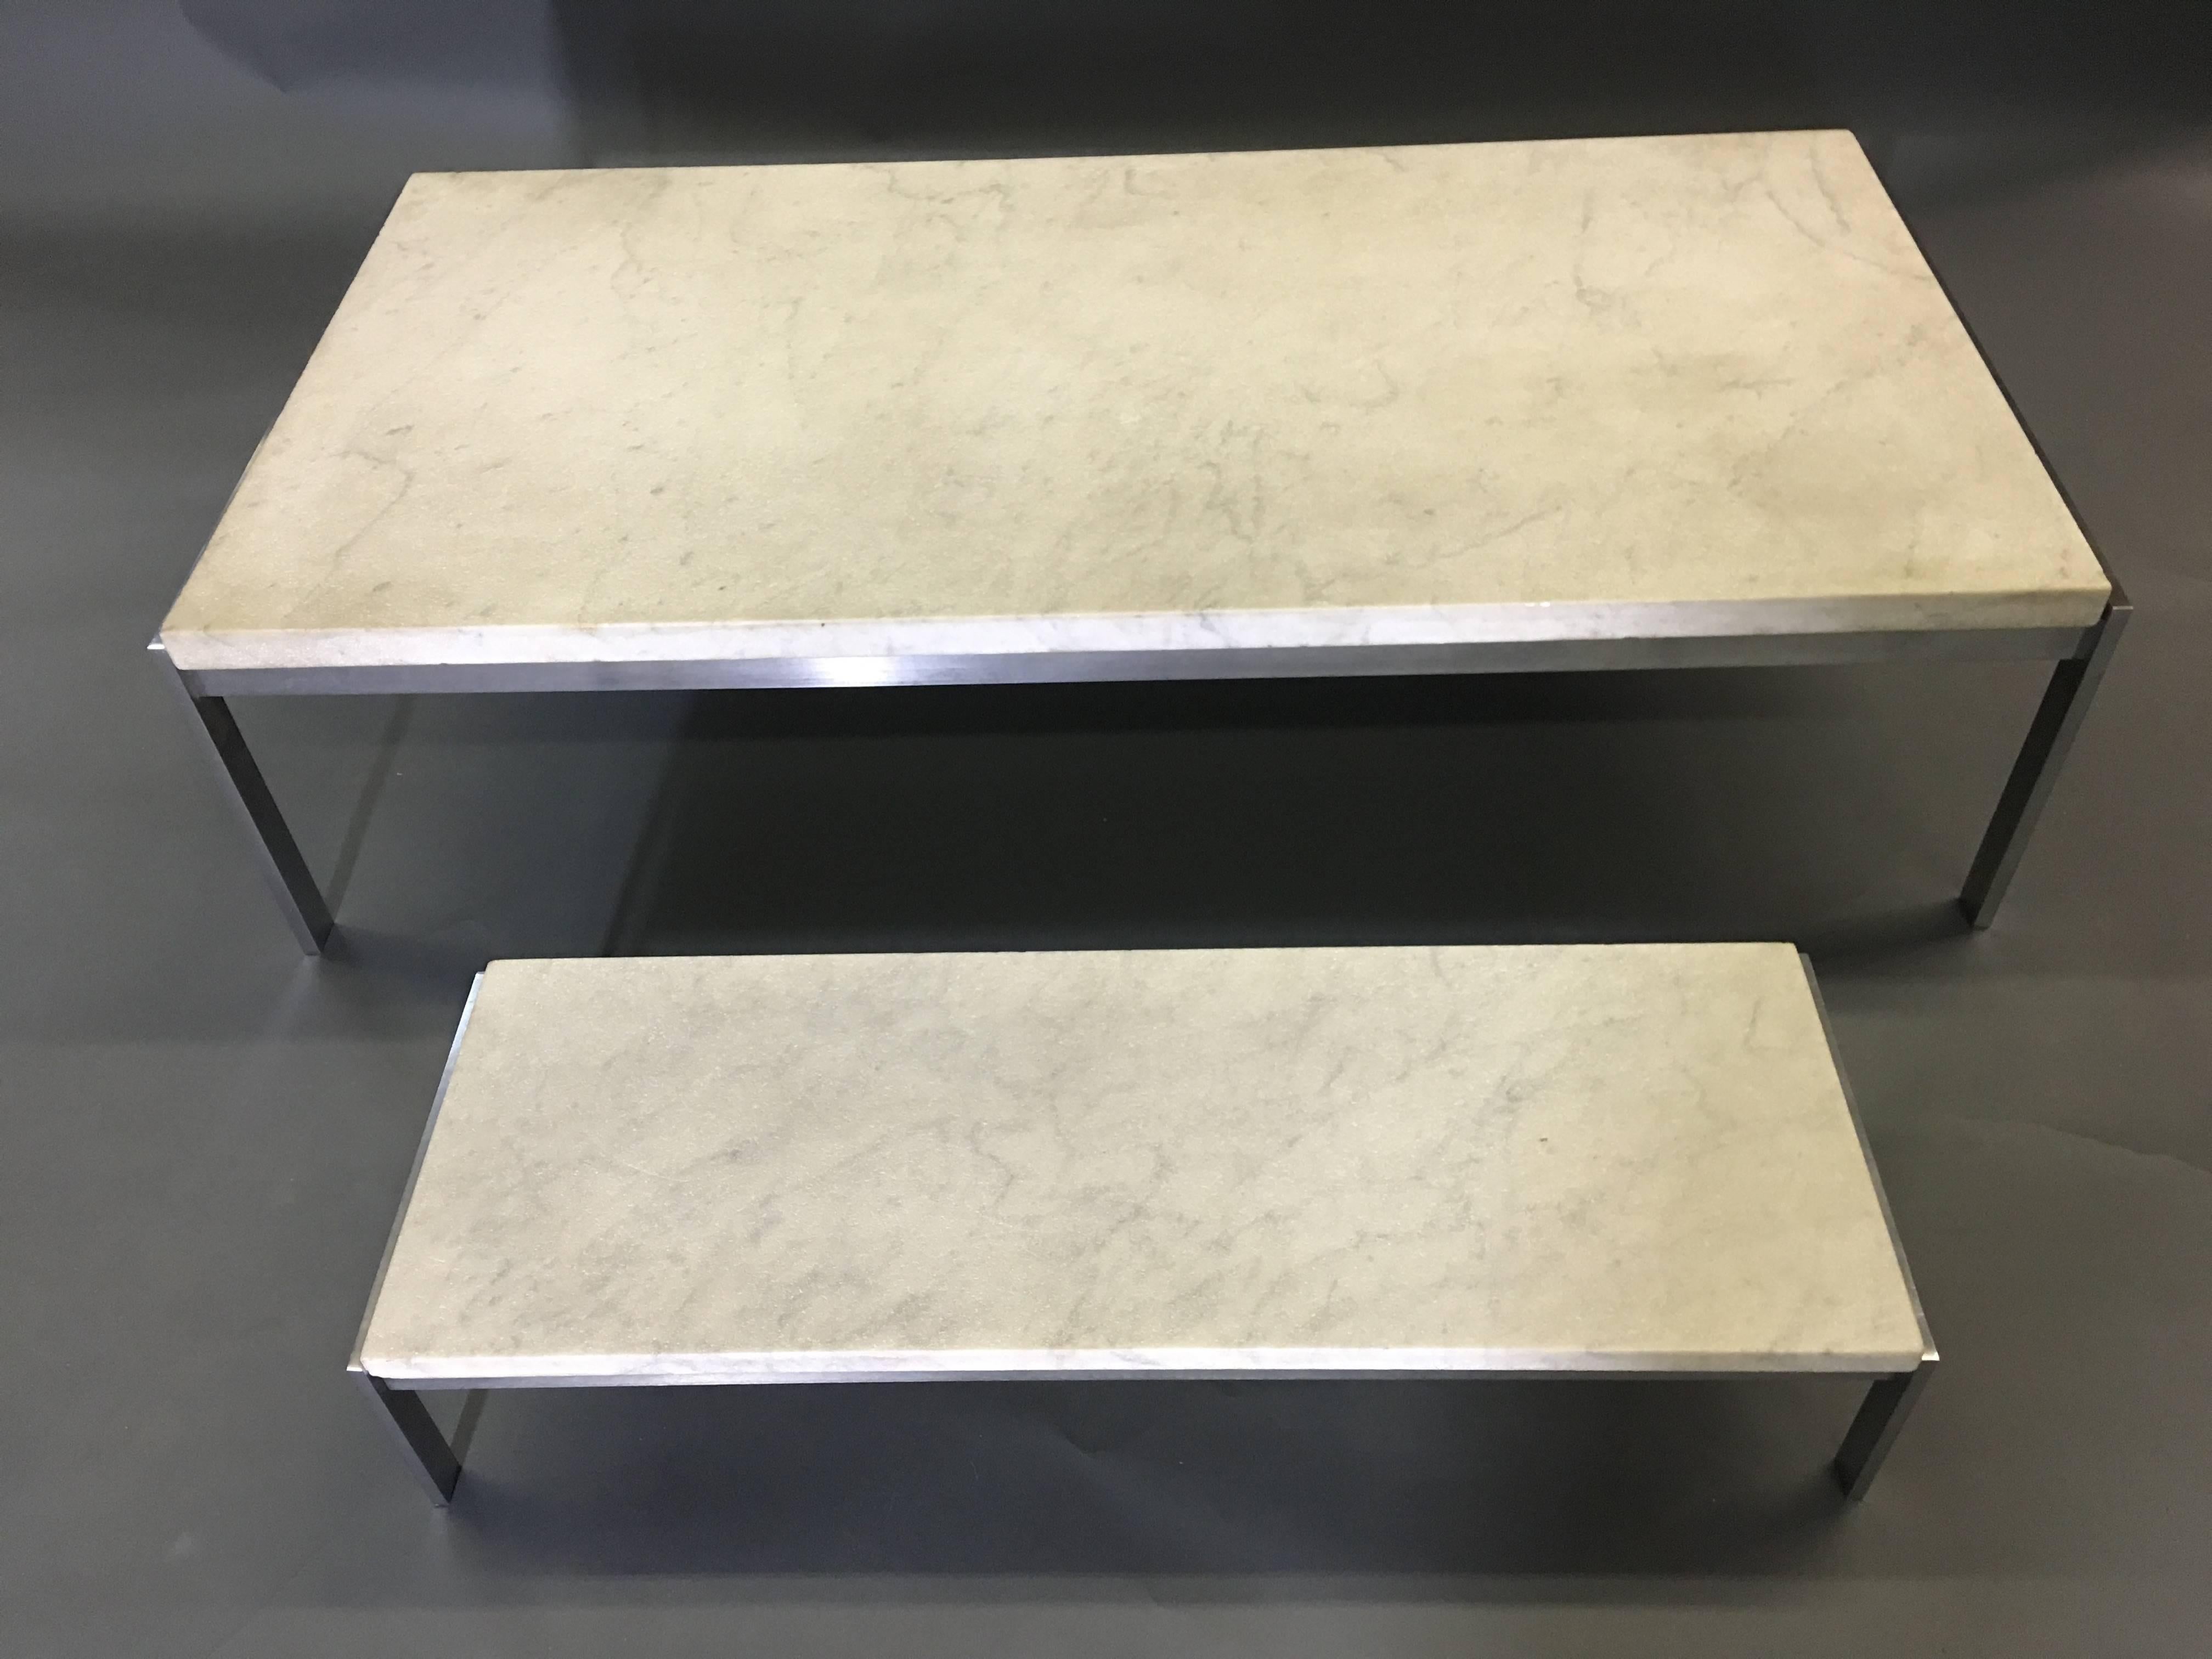 White rectangular marble tops inset into stainless steel bases marked 